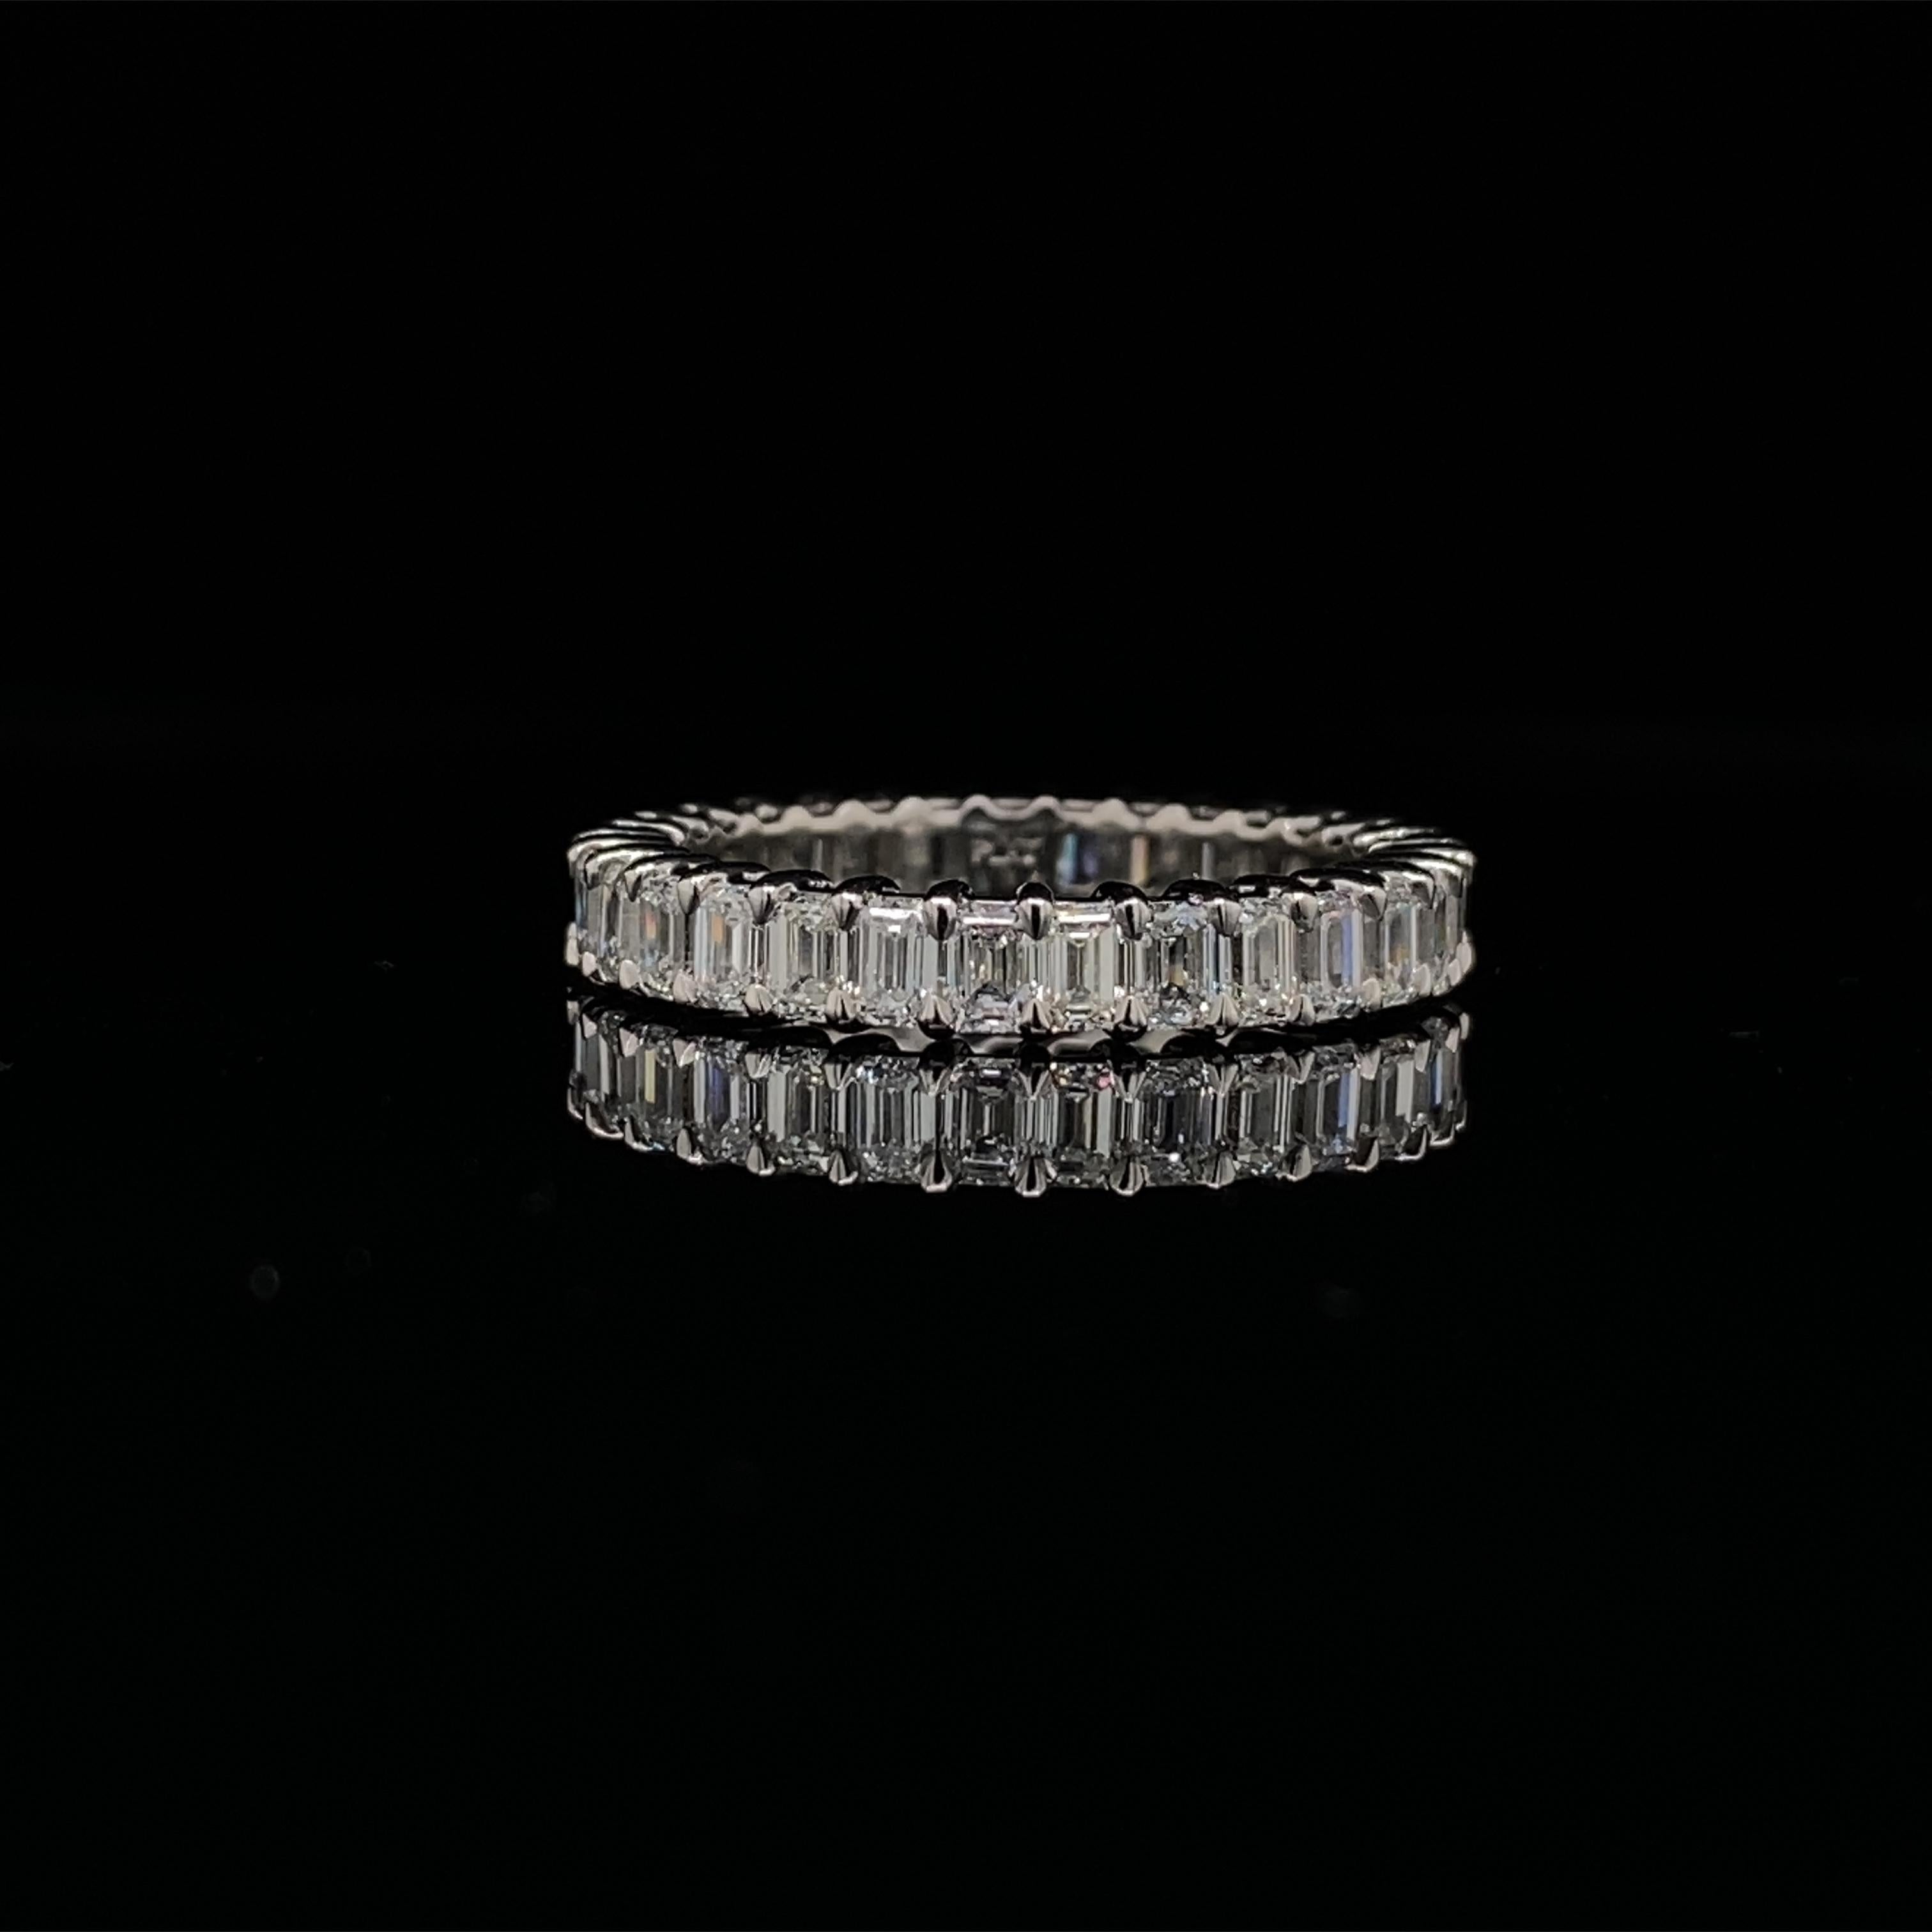 This Emerald cut diamond Eternity band has 31 Emerald cut diamonds.
The diamonds have a total carat of 2.51.
The diamonds are F-G color, VS clarity.
The ring is a finger size 6.5 and is set in platinum.